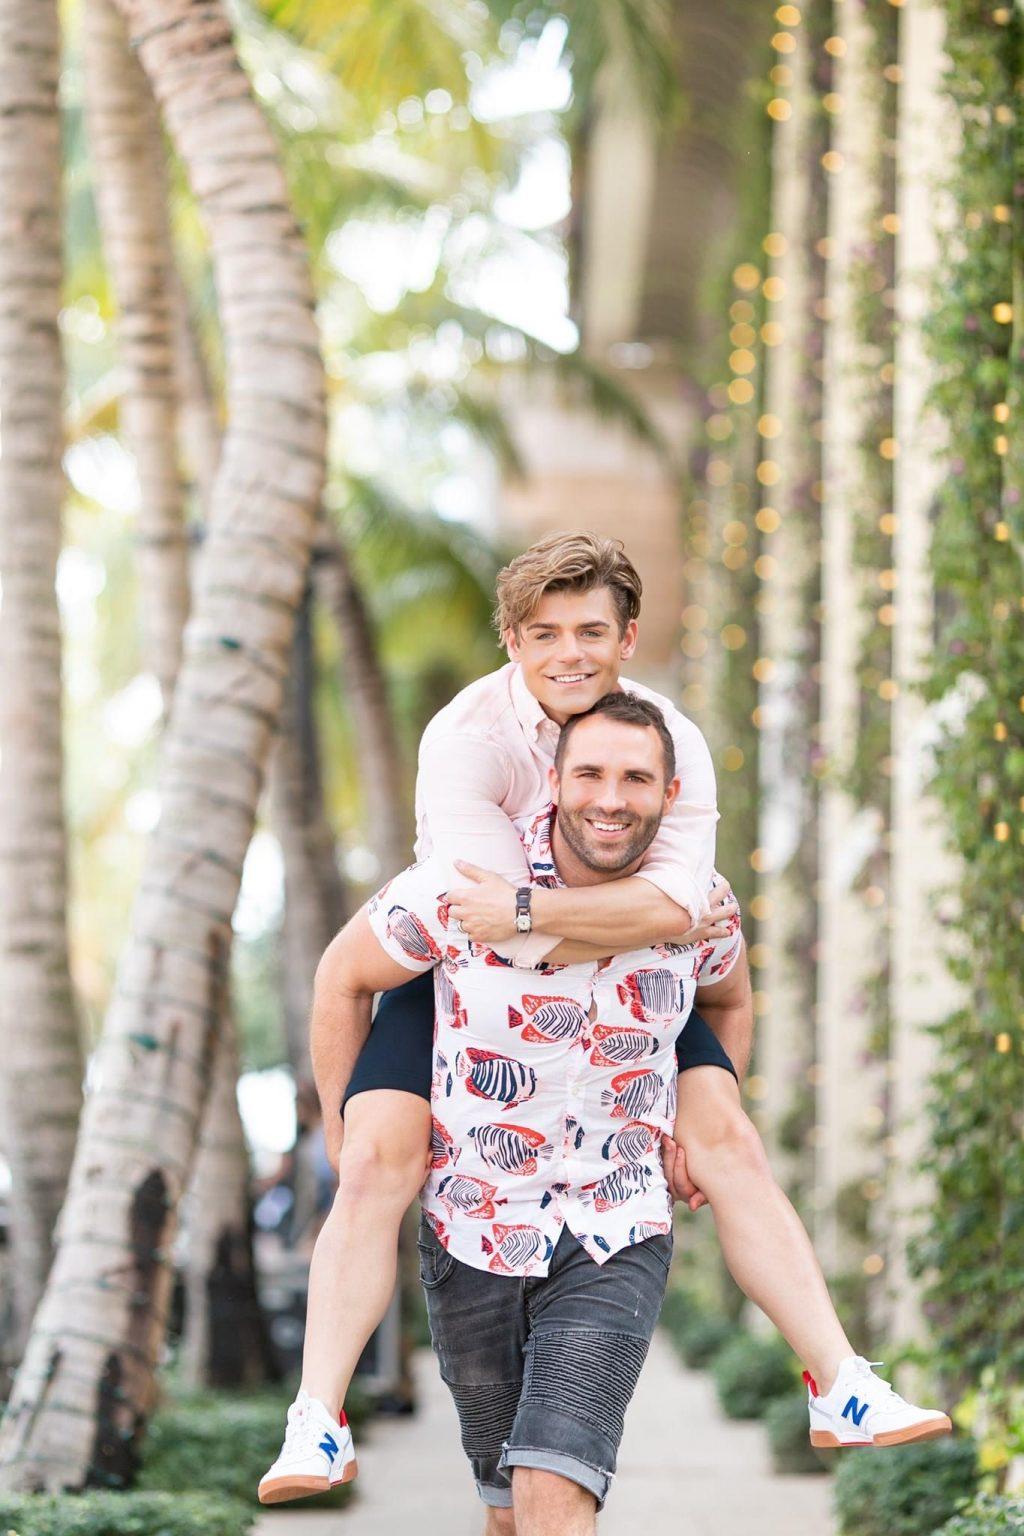 Knight gives Clayton a piggy back ride near Aneé Atelier in Palm Beach, Fla. in March. In July, the couple created an LGBTQ+ channel titled "A Gay in the Life."